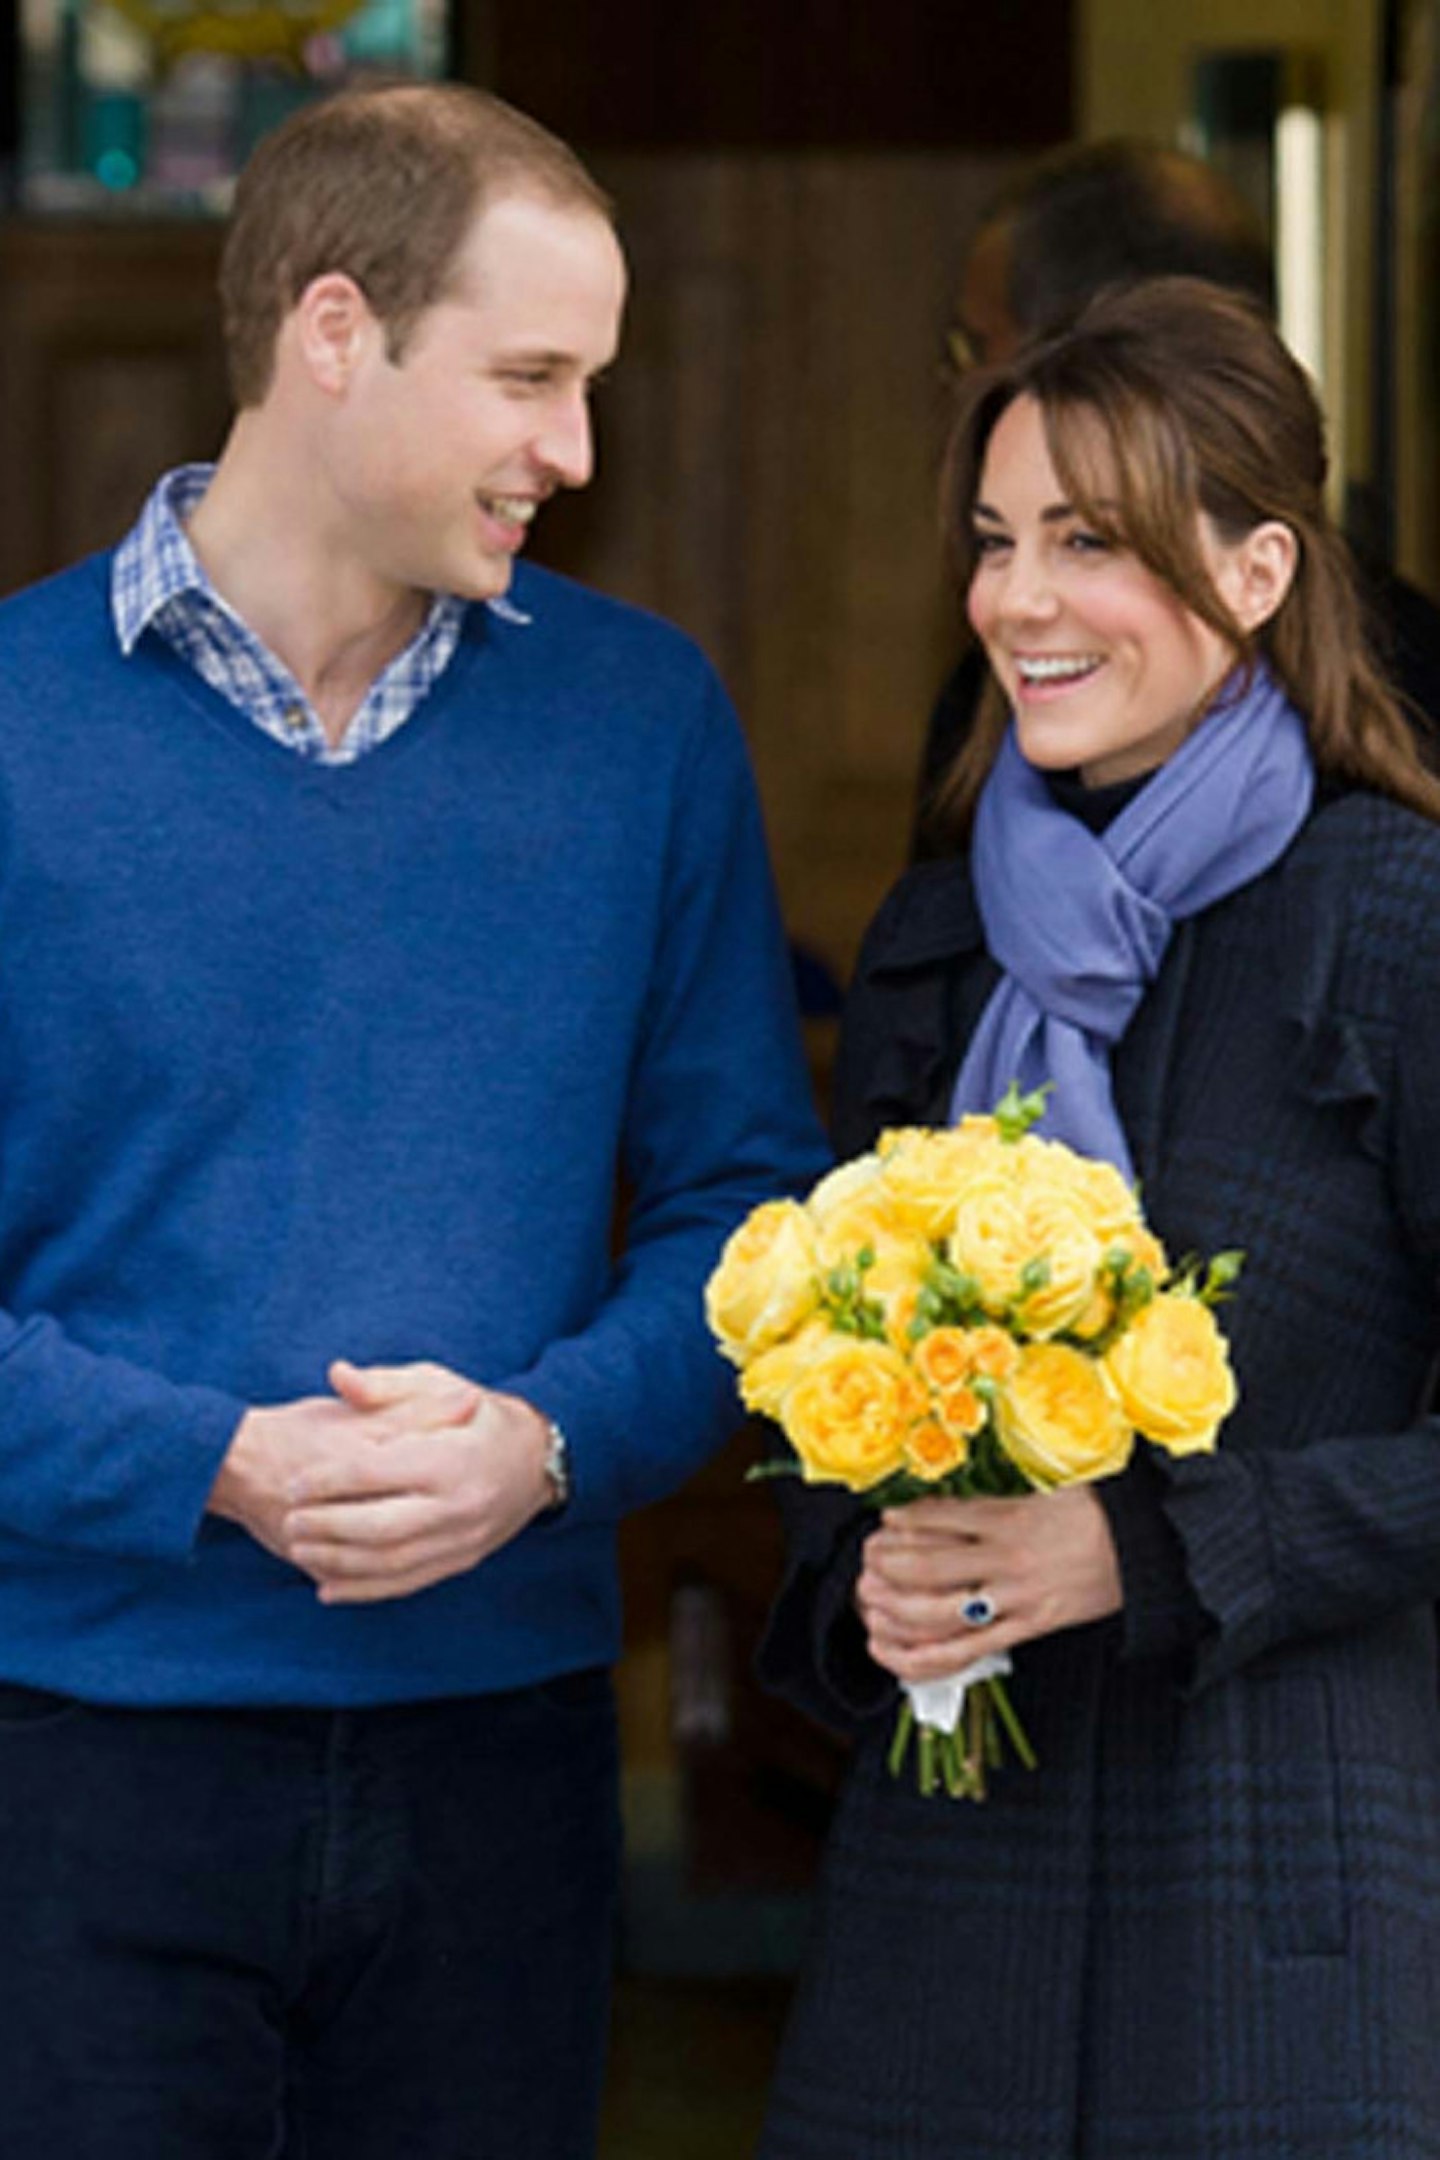 38-37. Wills picking up a pregnant Kate from hospital in December 2012